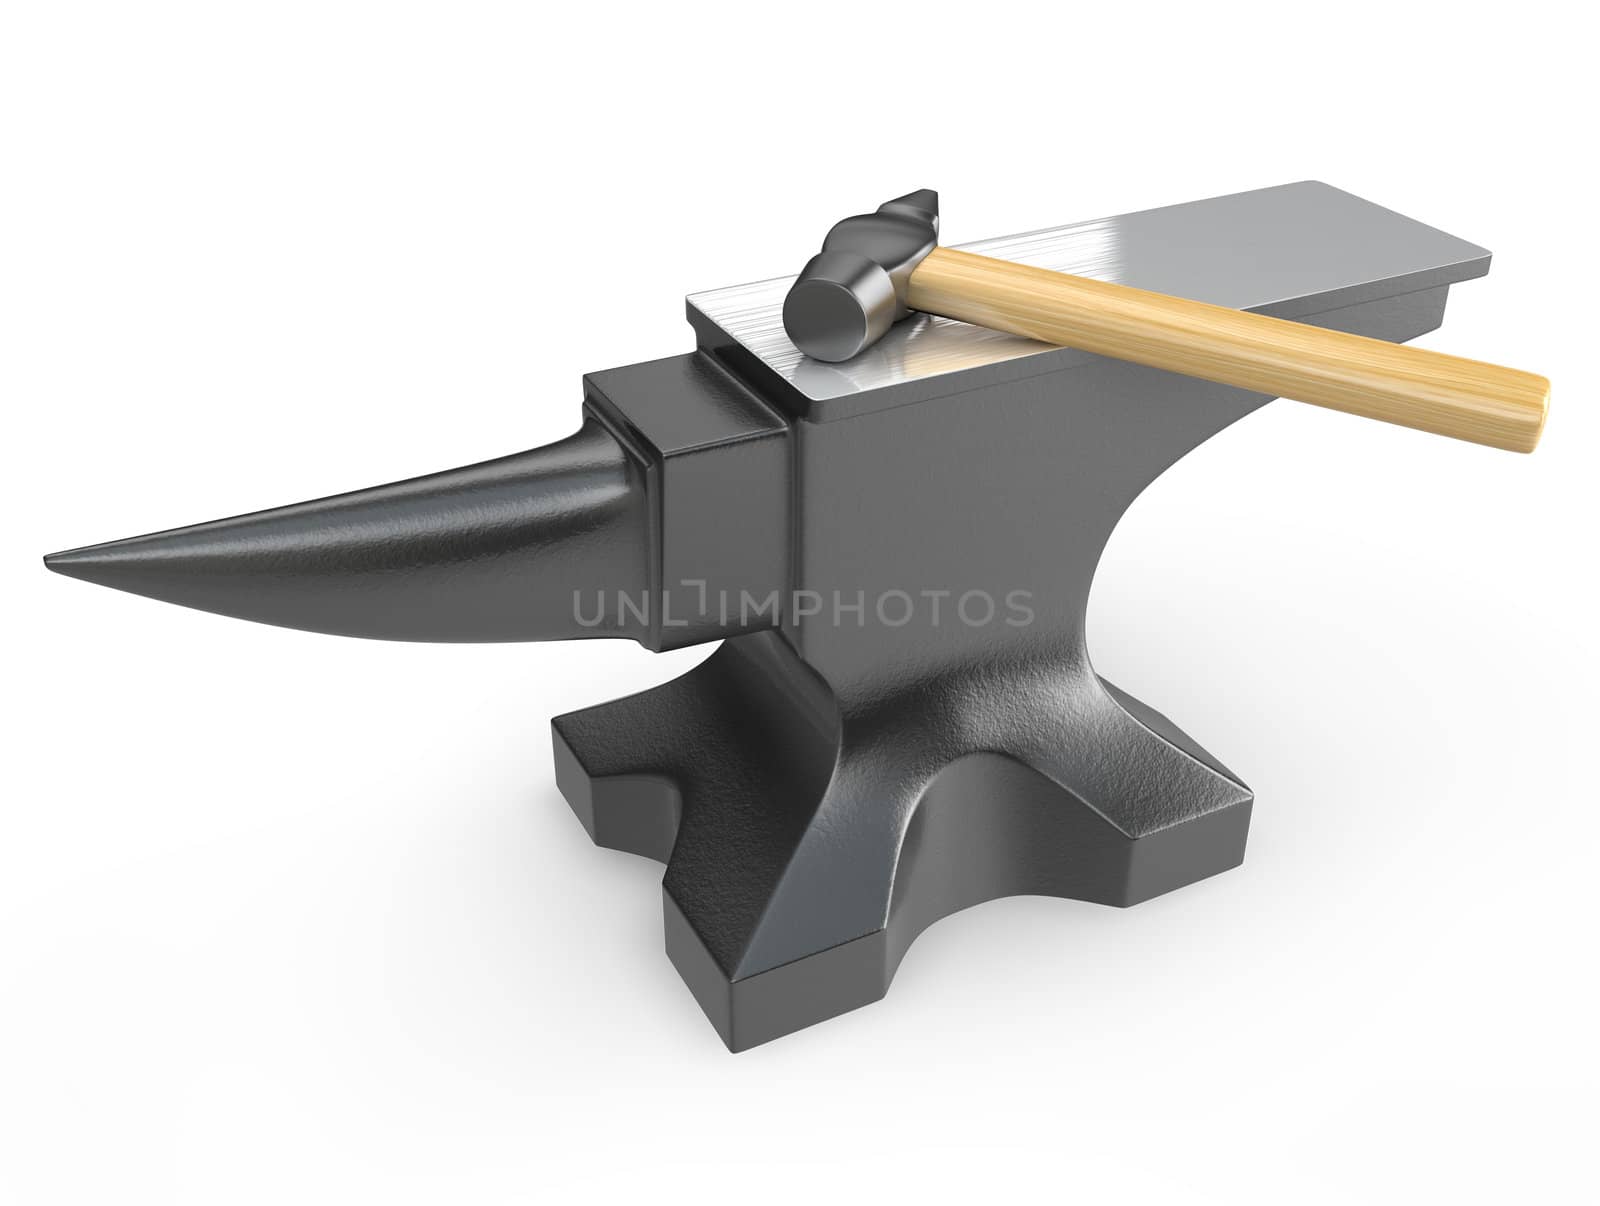 Hammer on a metal anvil isolated on white background